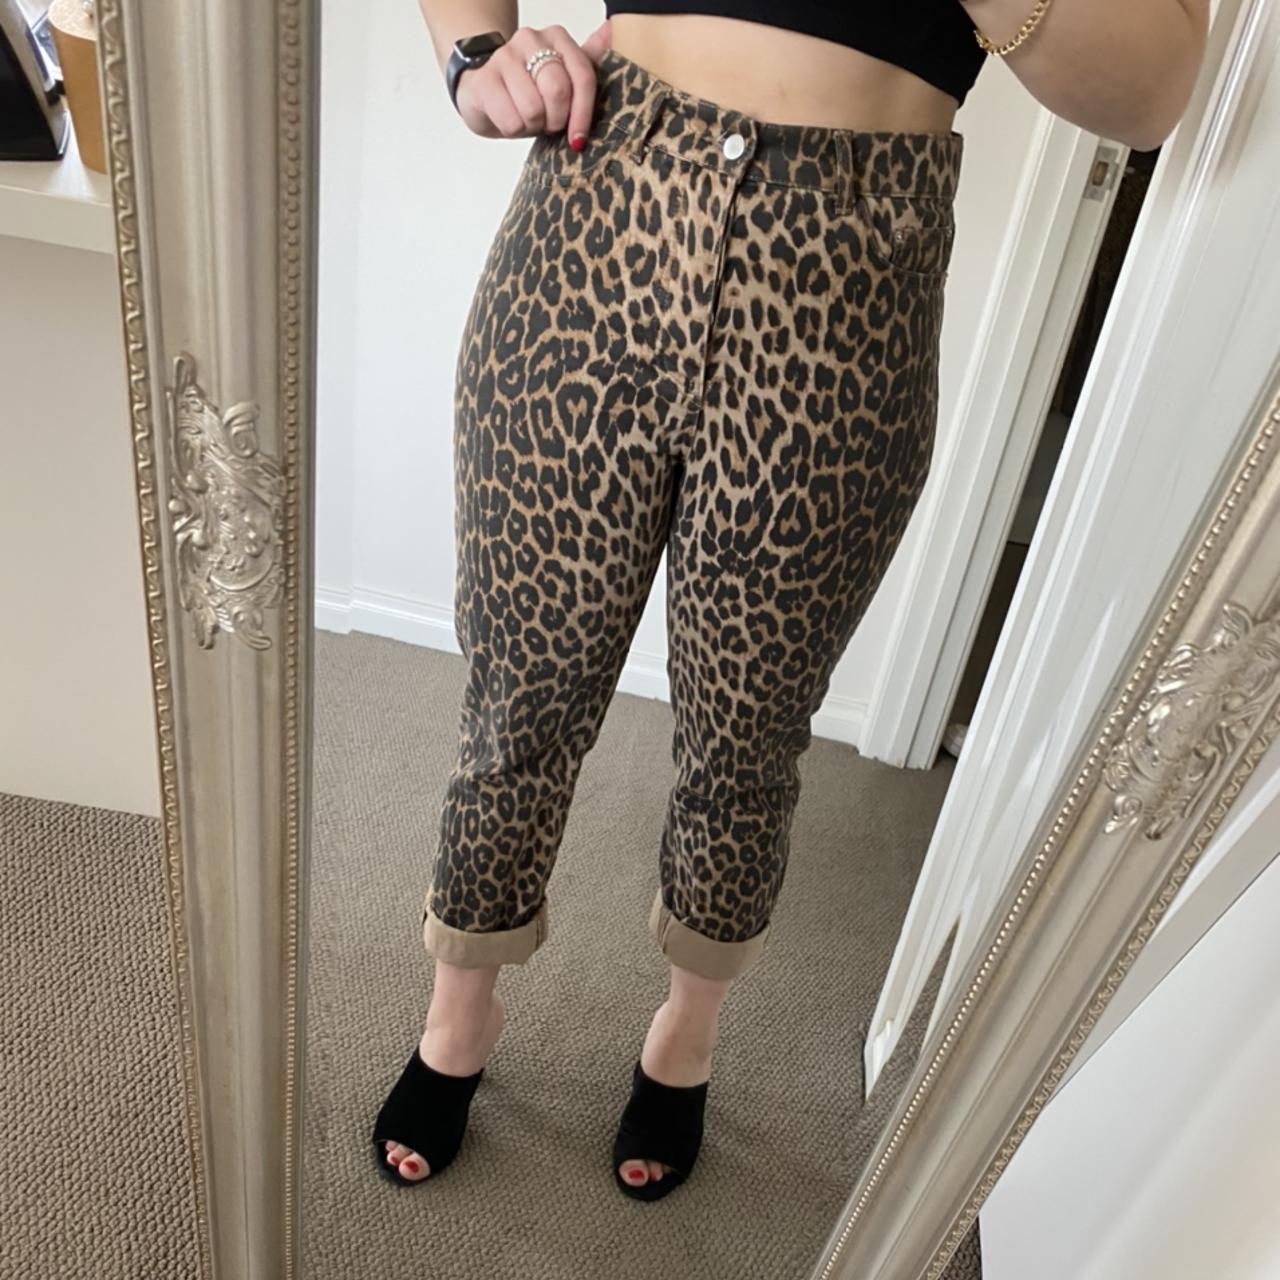 Zara Belted Animal Print Leopard Belted Trousers Pants NEW without Tags  Medium  Clothes design Leopard trousers Trouser pants